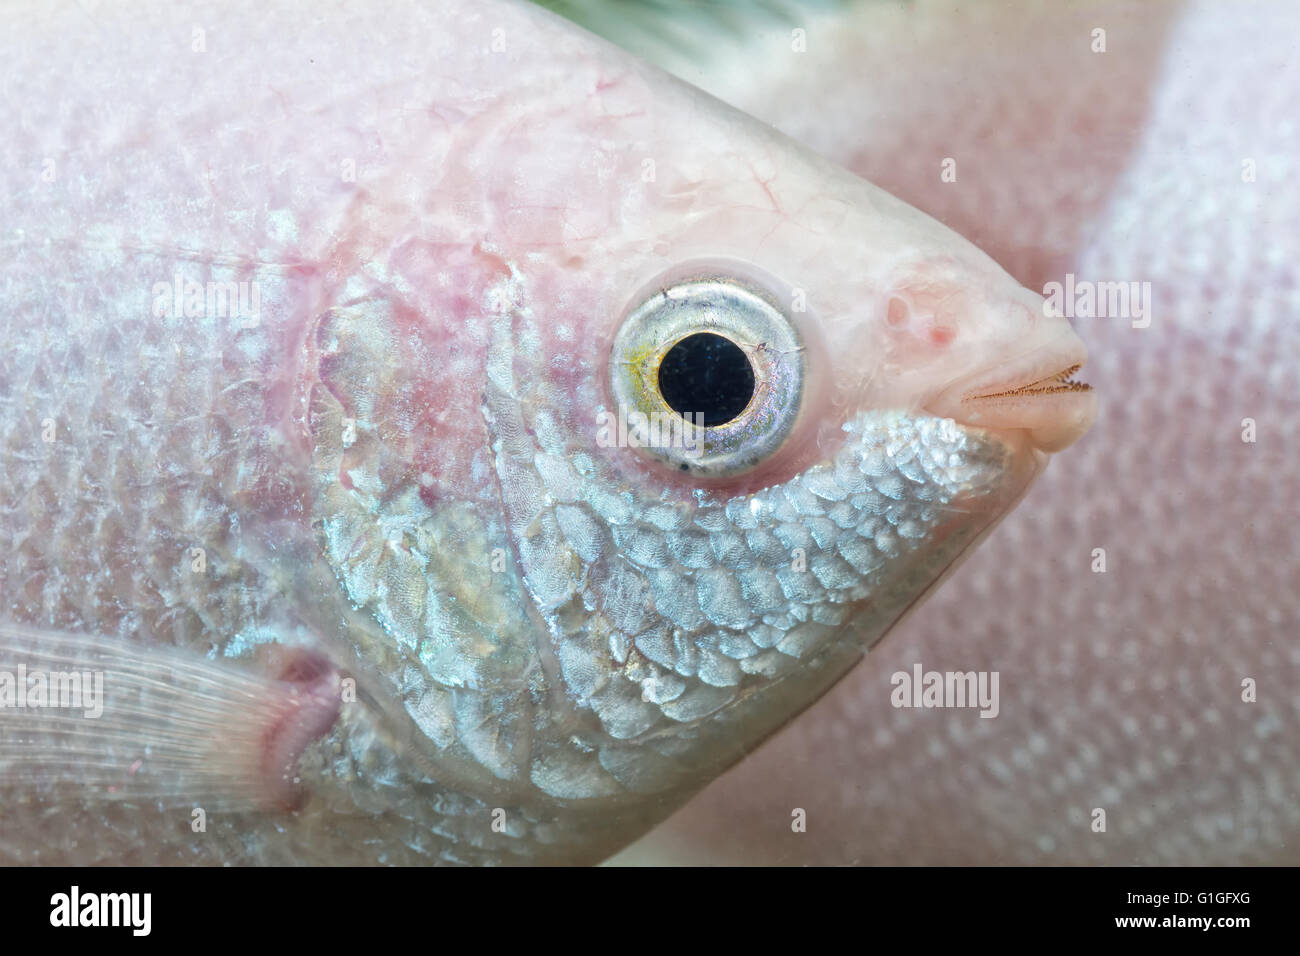 Detail of head of kissing gurami with blurred background (Helostoma teminckii) Stock Photo